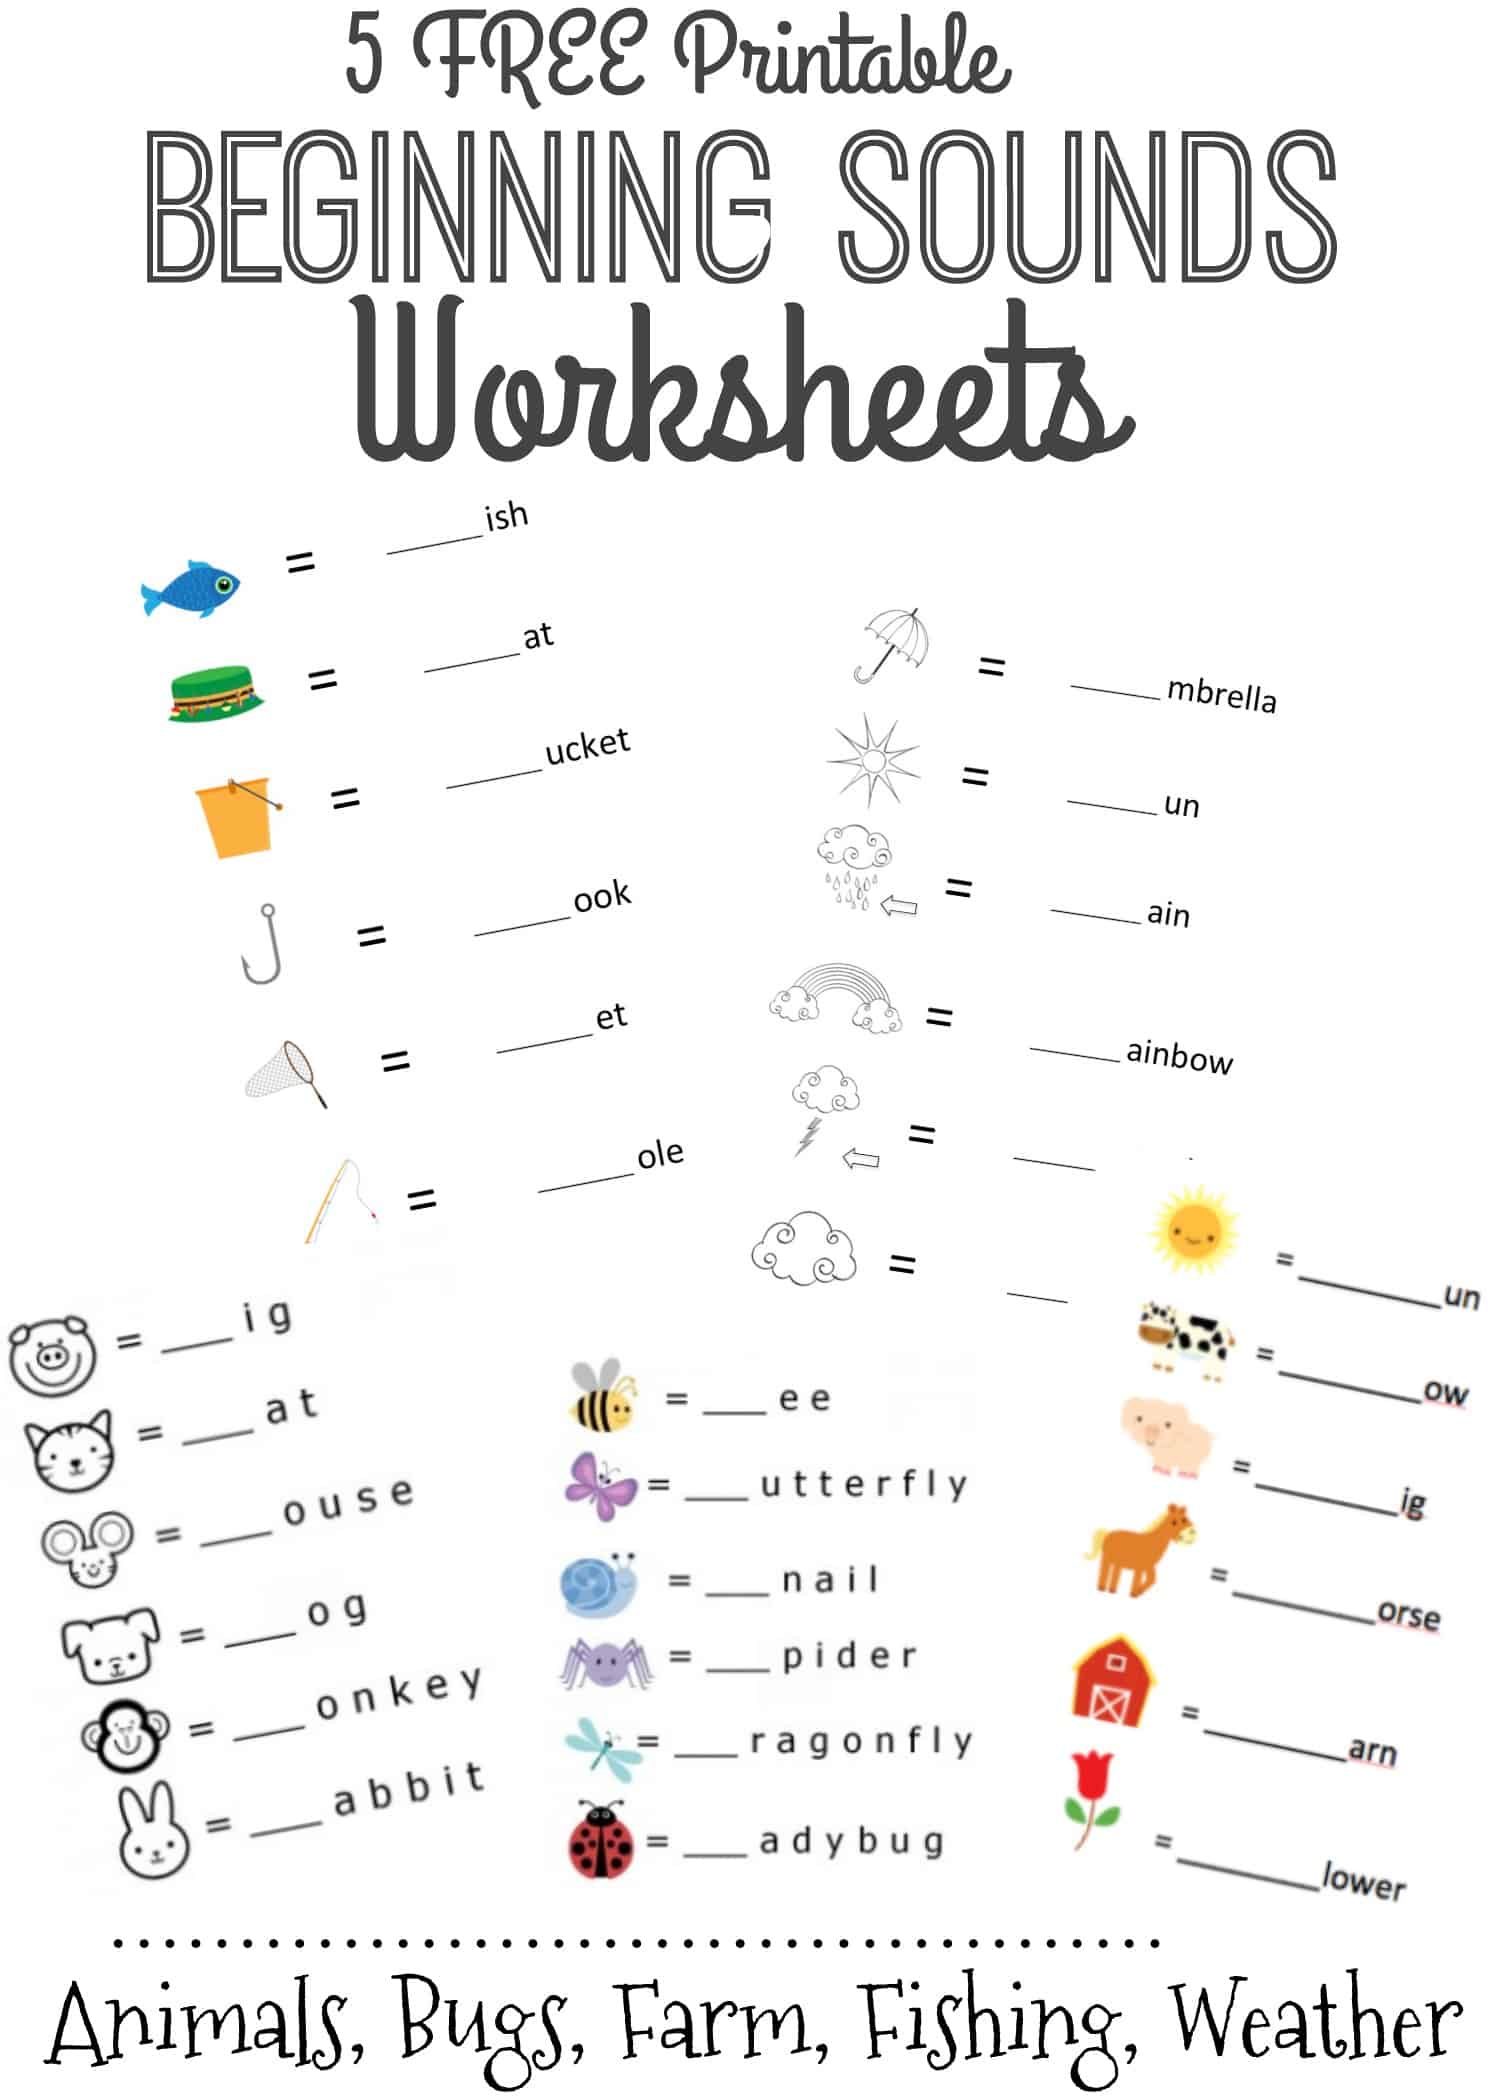 collection of five printable beginning sounds worksheets for early learners